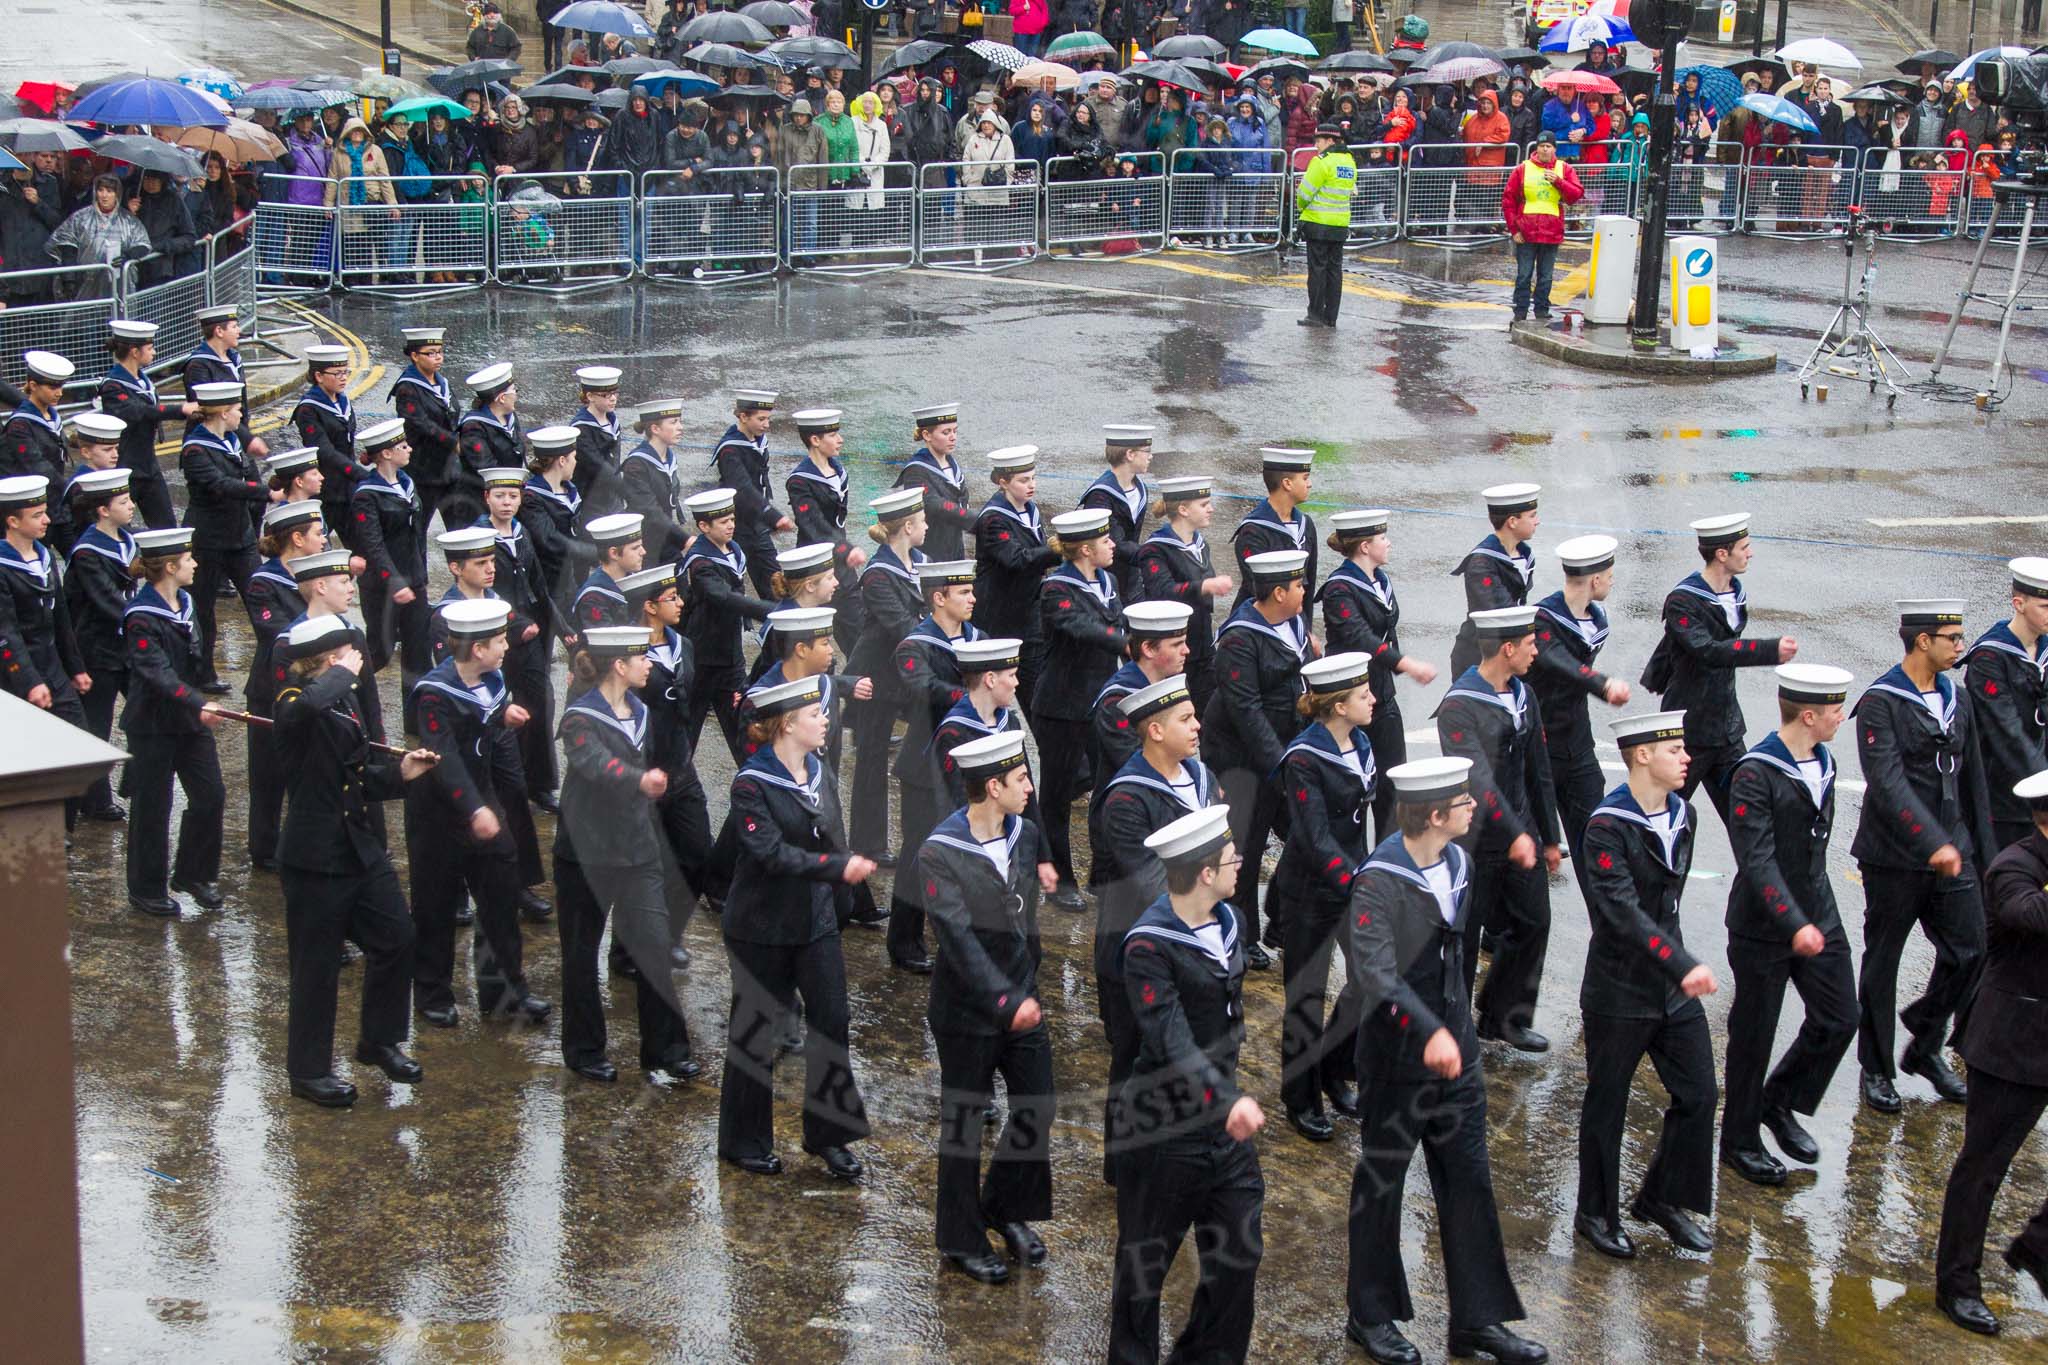 Lord Mayor's Show 2013: 101-London Area Sea Cadet Band-more than 100 Sea Cadets from 16 units across London are taking part in the parade this year..
Press stand opposite Mansion House, City of London,
London,
Greater London,
United Kingdom,
on 09 November 2013 at 11:54, image #1201